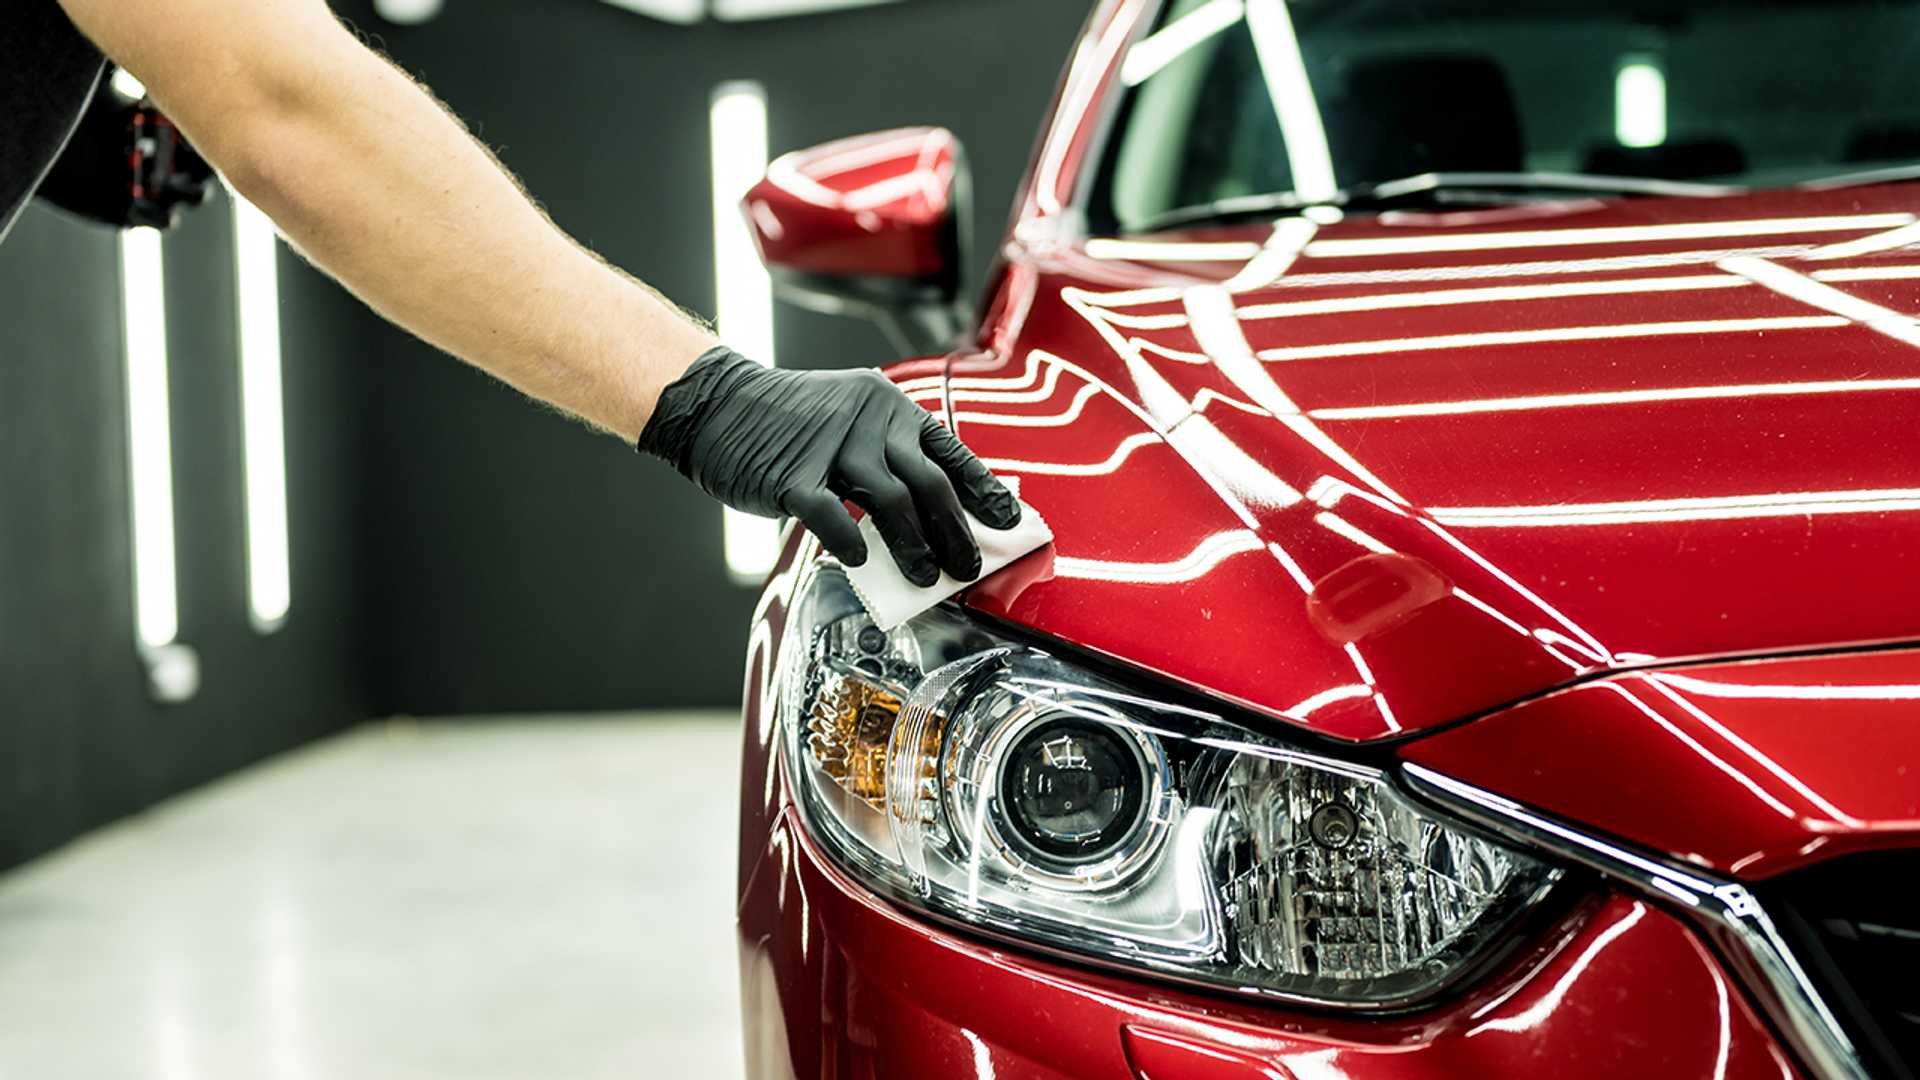 WHAT'S THE DIFFERENCE BETWEEN CAR WAX & CERAMIC COATING?